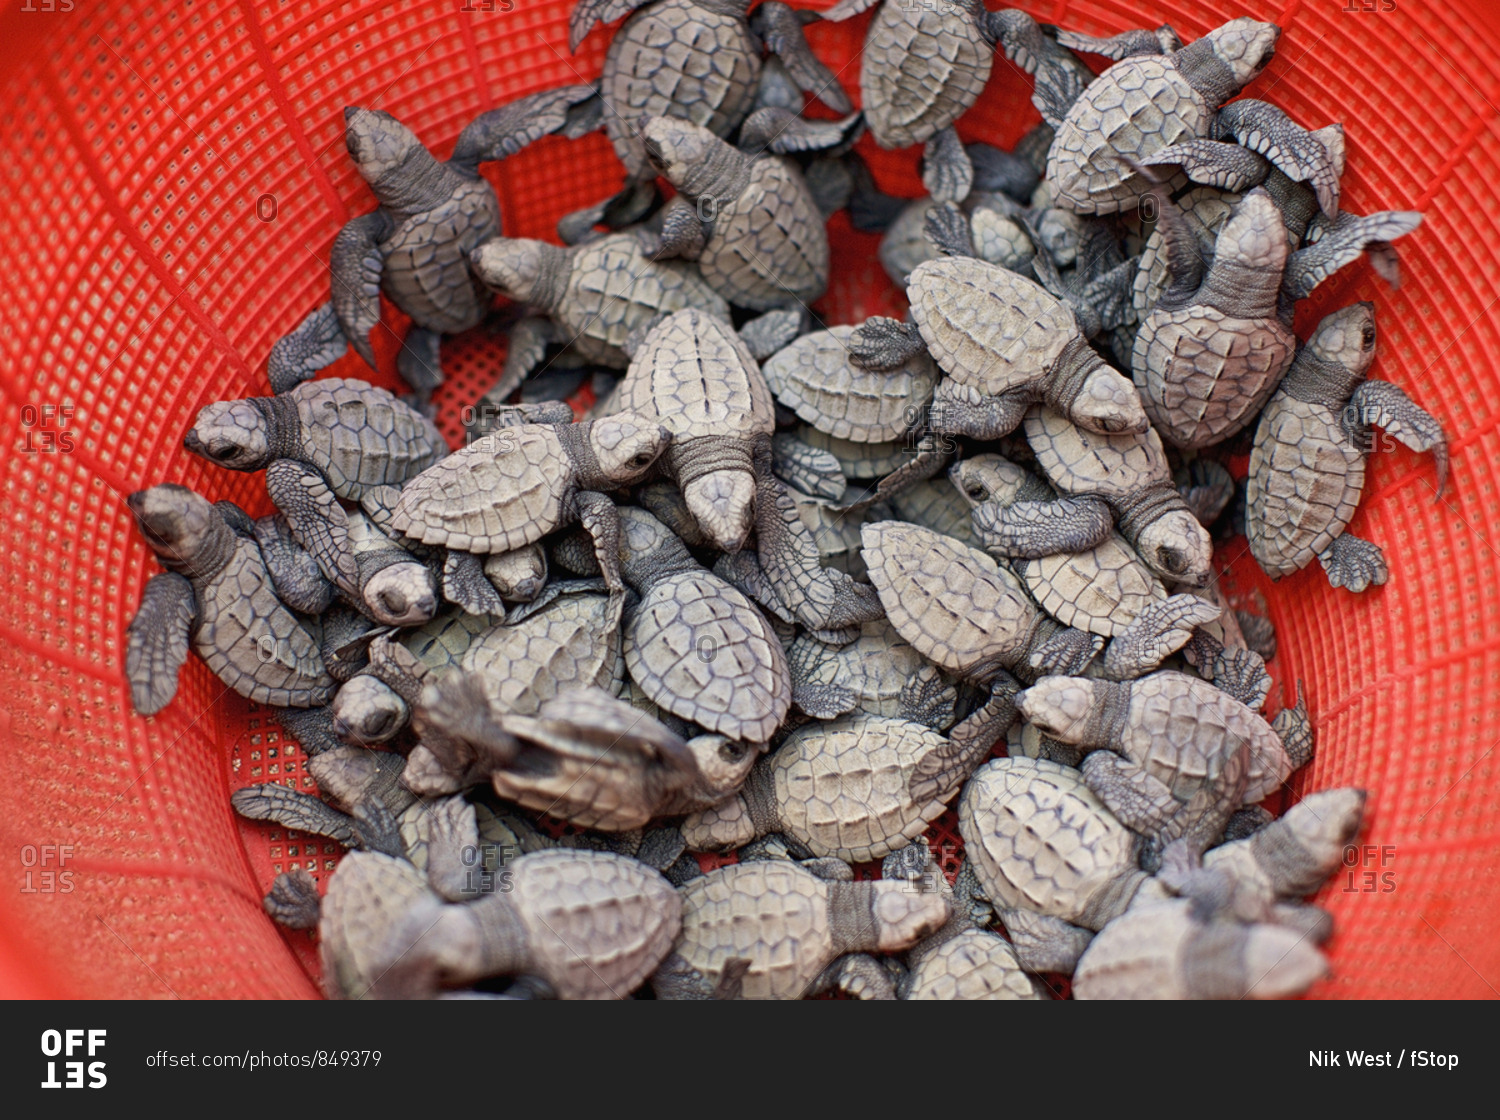 Baby turtles in red strainer